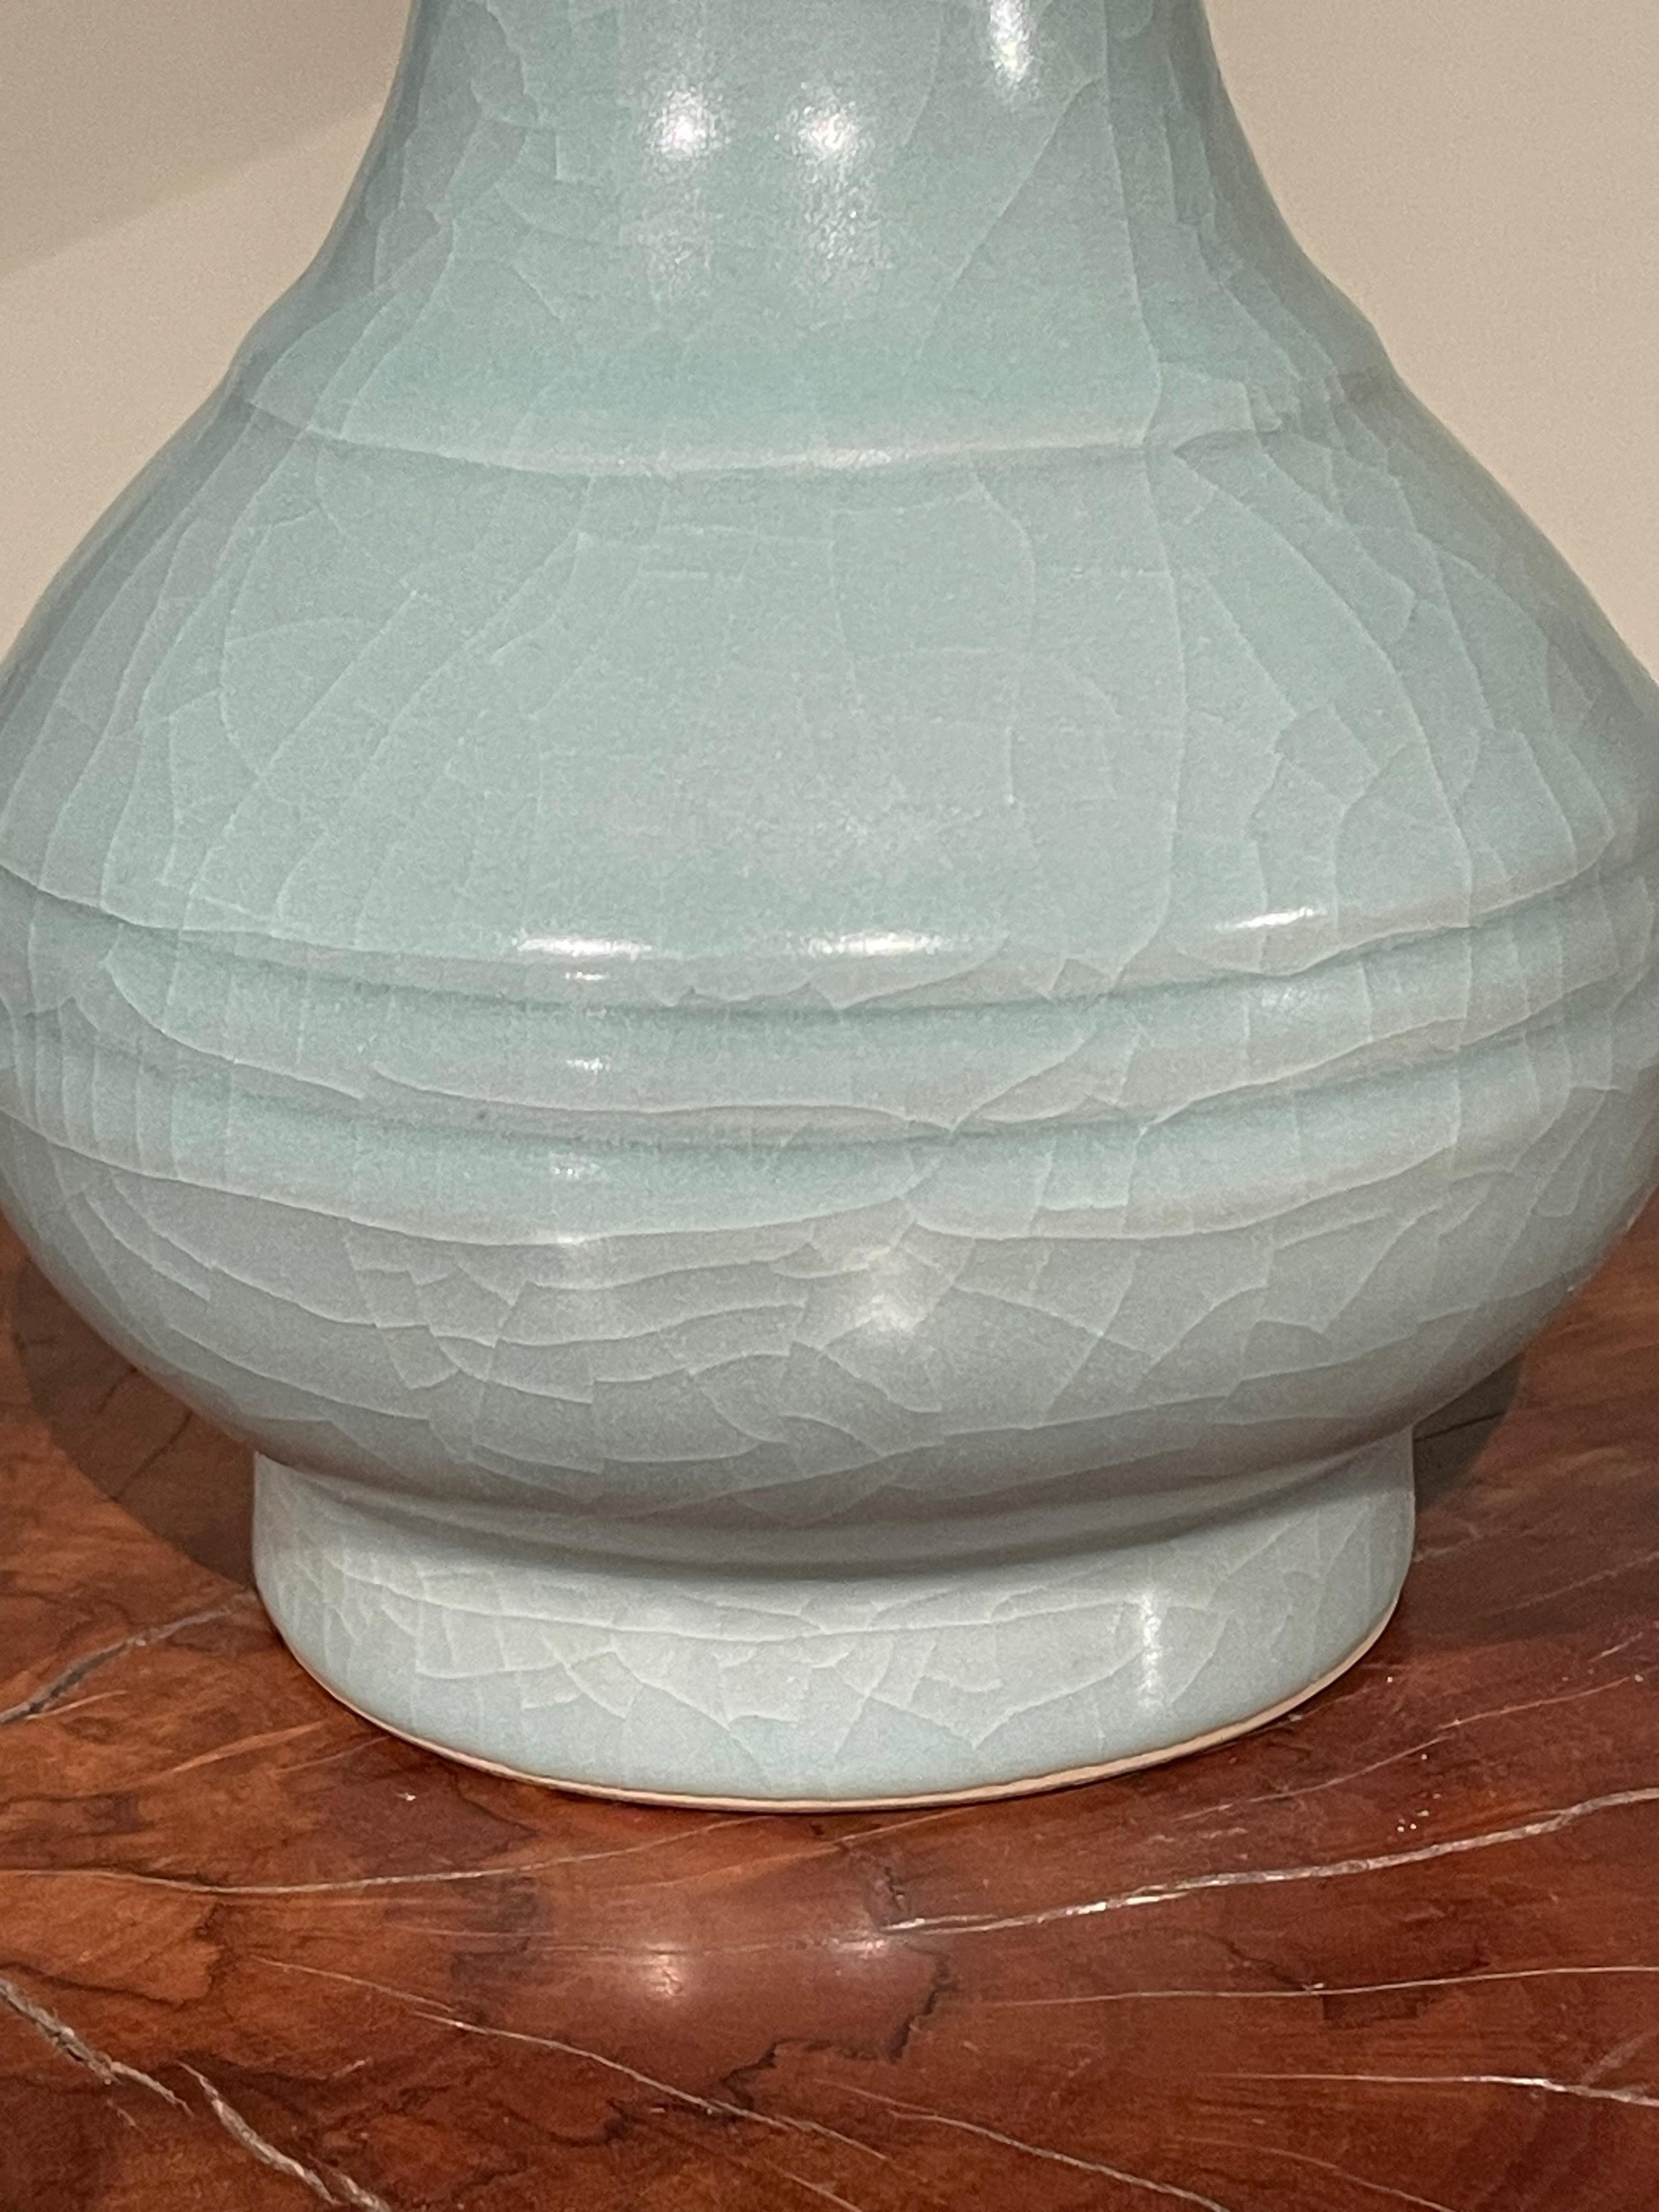 Pale Turquoise Tall Neck With Horizontal Rib Details Vase, China, Contemporary In New Condition For Sale In New York, NY